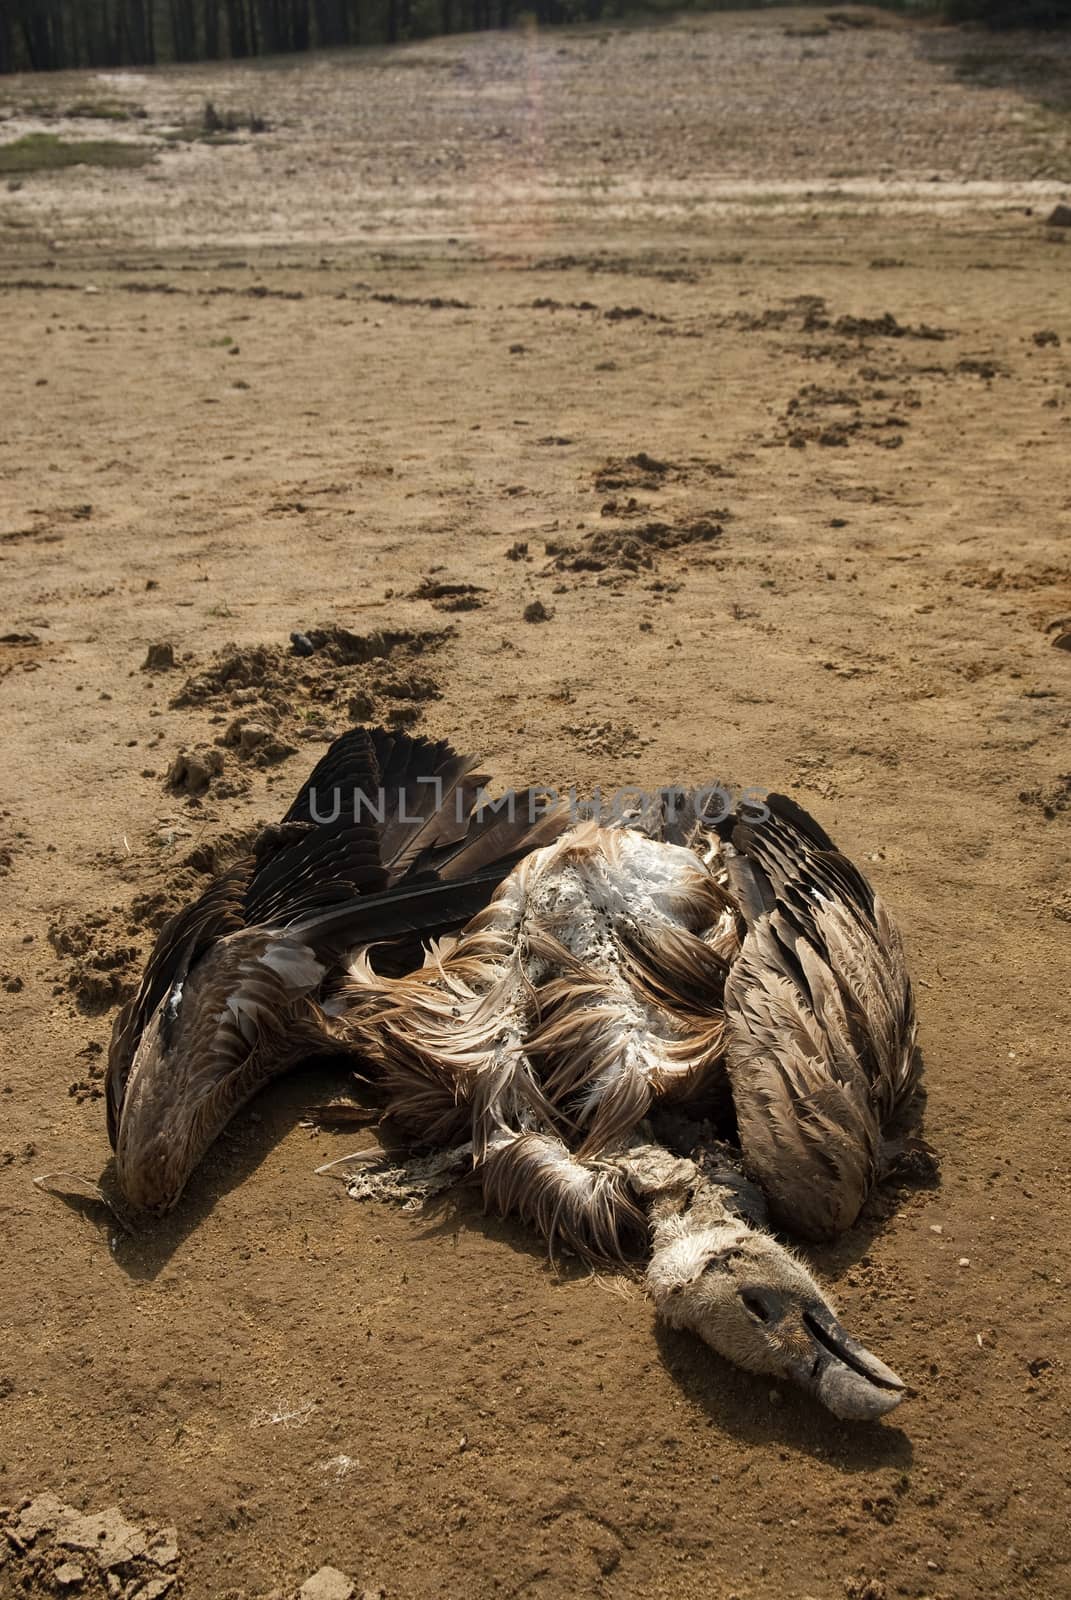 A vulture killed by poison in the dry bed of a reservoir, Gyps f by jalonsohu@gmail.com